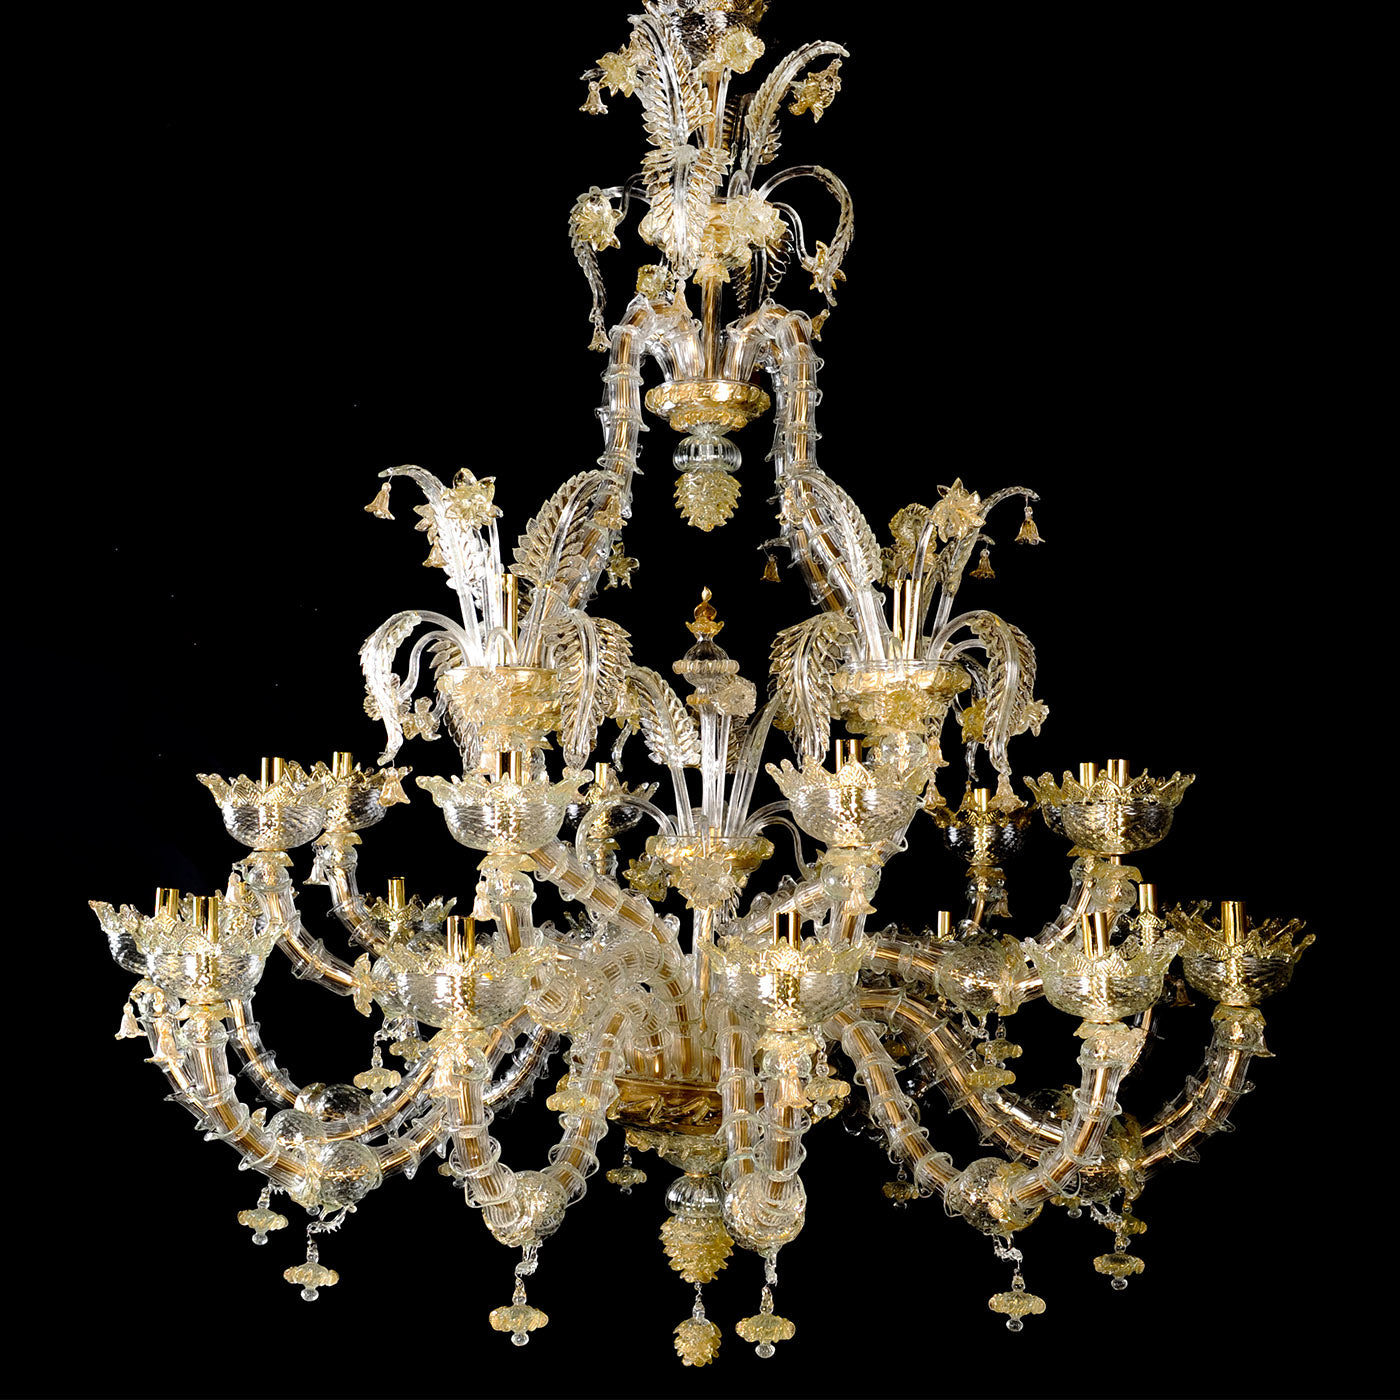 Rezzonico-style Gold and Crystal Chandelier #7 - Alternative view 2